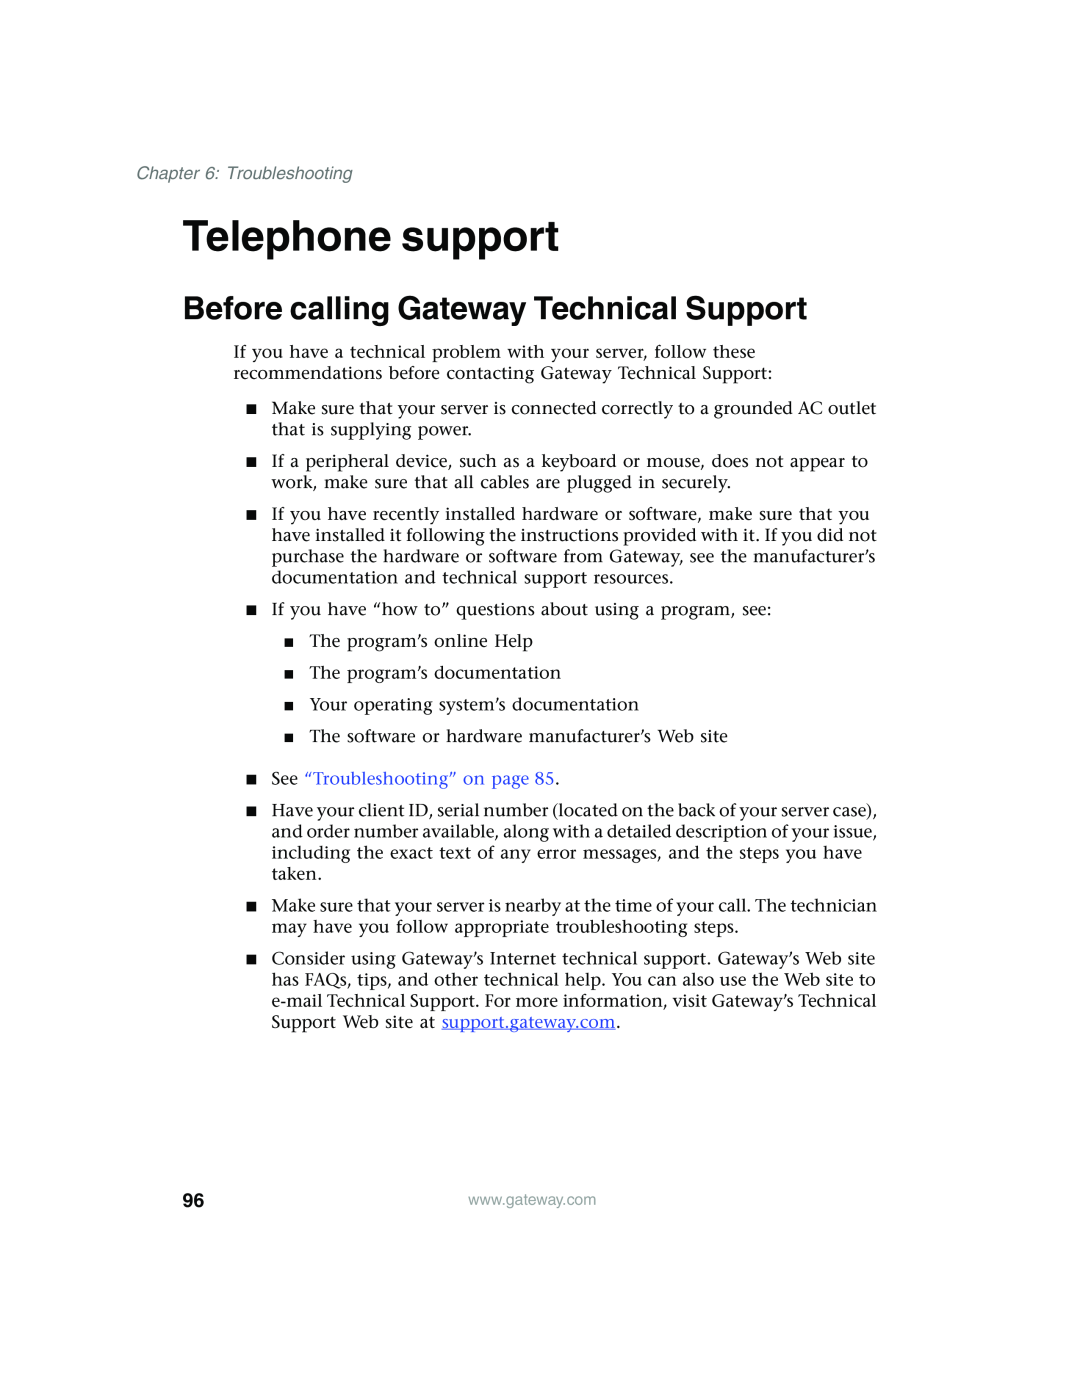 Gateway 980 manual Telephone support, Before calling Gateway Technical Support, See “Troubleshooting” on page 